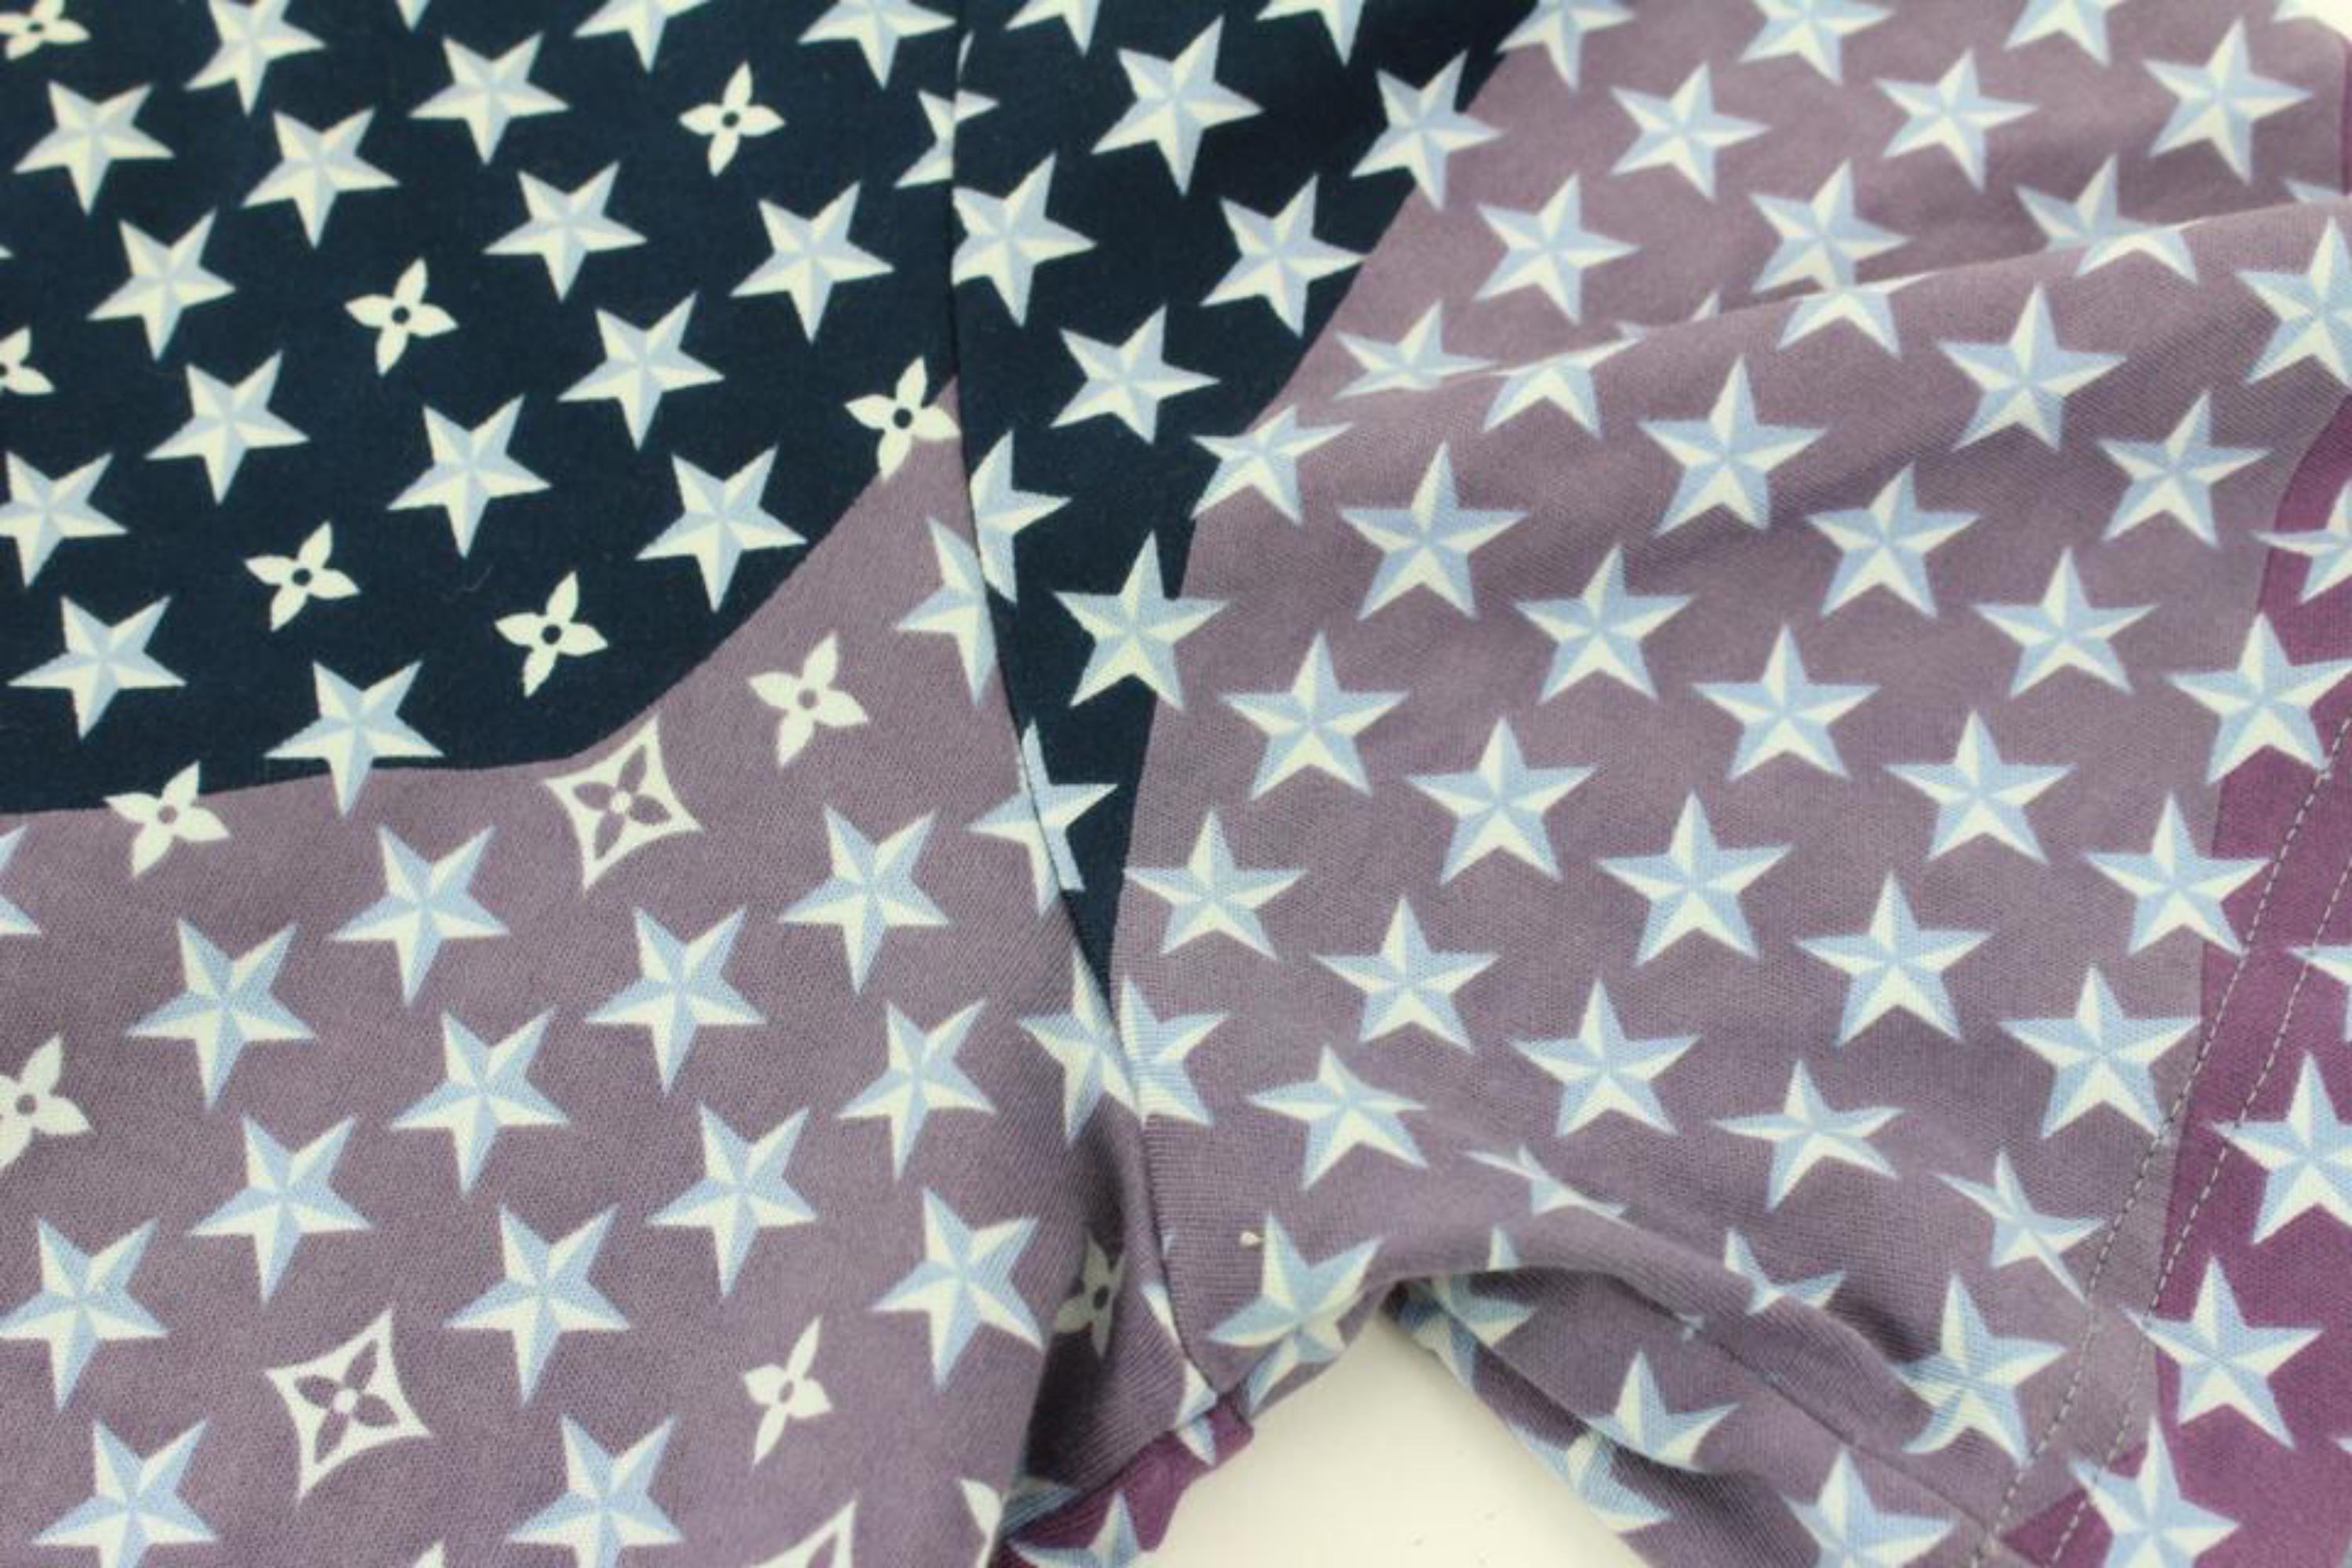 Louis Vuitton Mens Large Purple x Red x Blue Star Monogram T-Shirt Tee Shirt 121lv40
Made In: Italy
Measurements: Length:  17.5